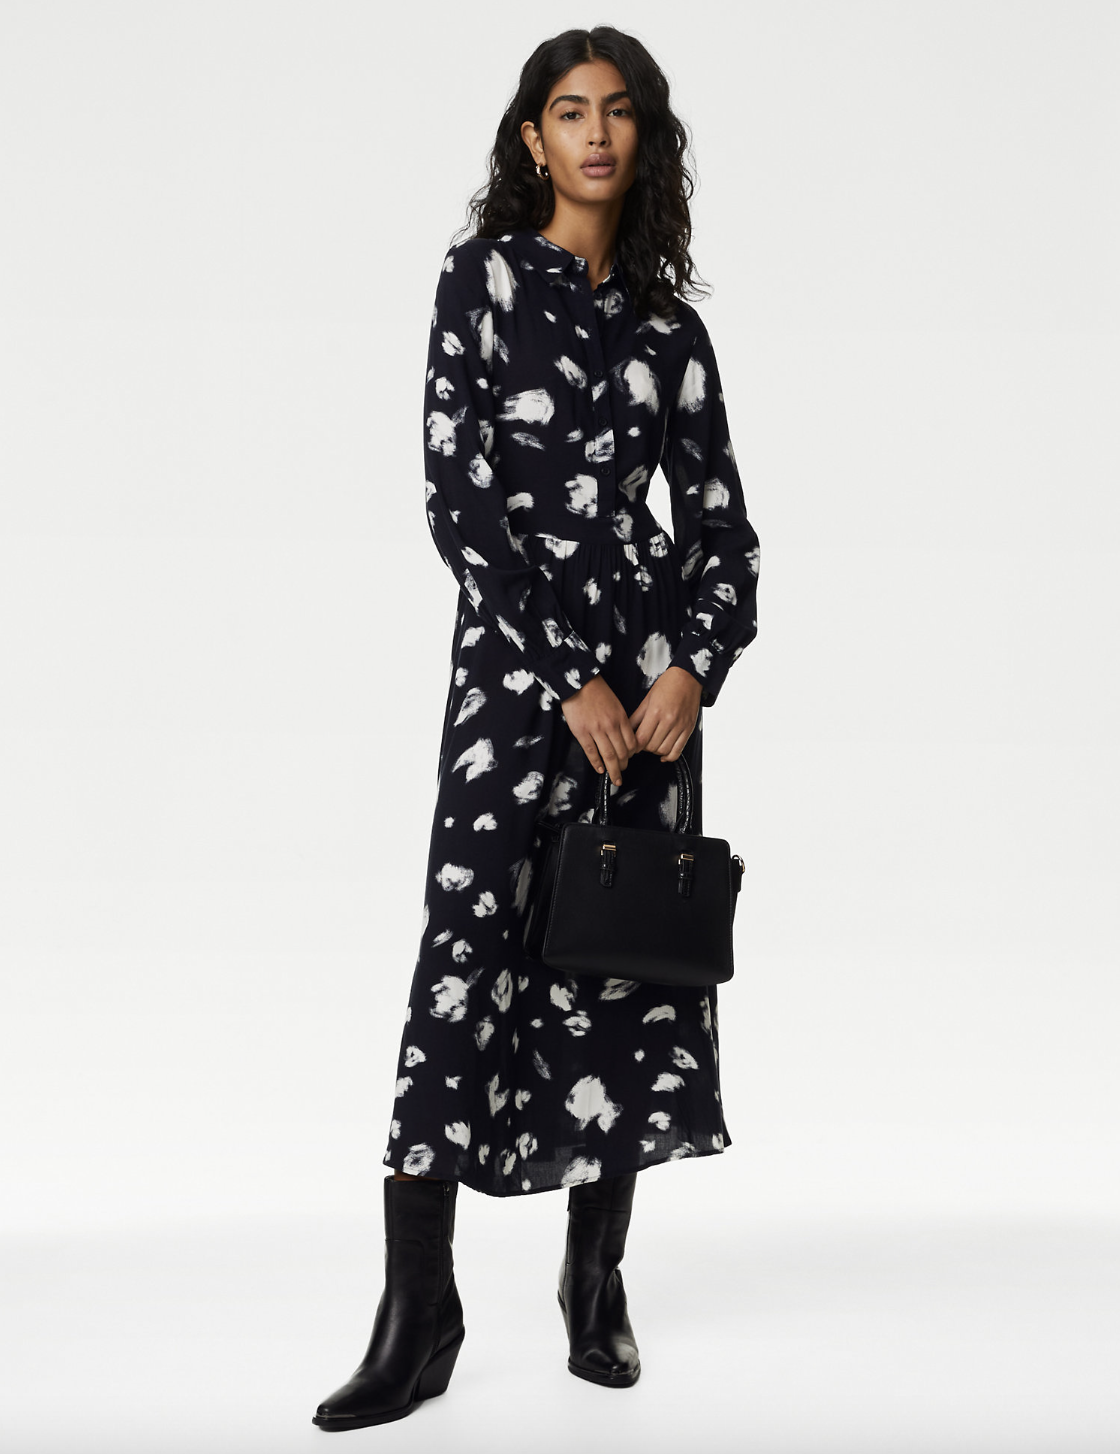 You can shop this midi shirt dress in numerous statement patterns. (Marks & Spencer)